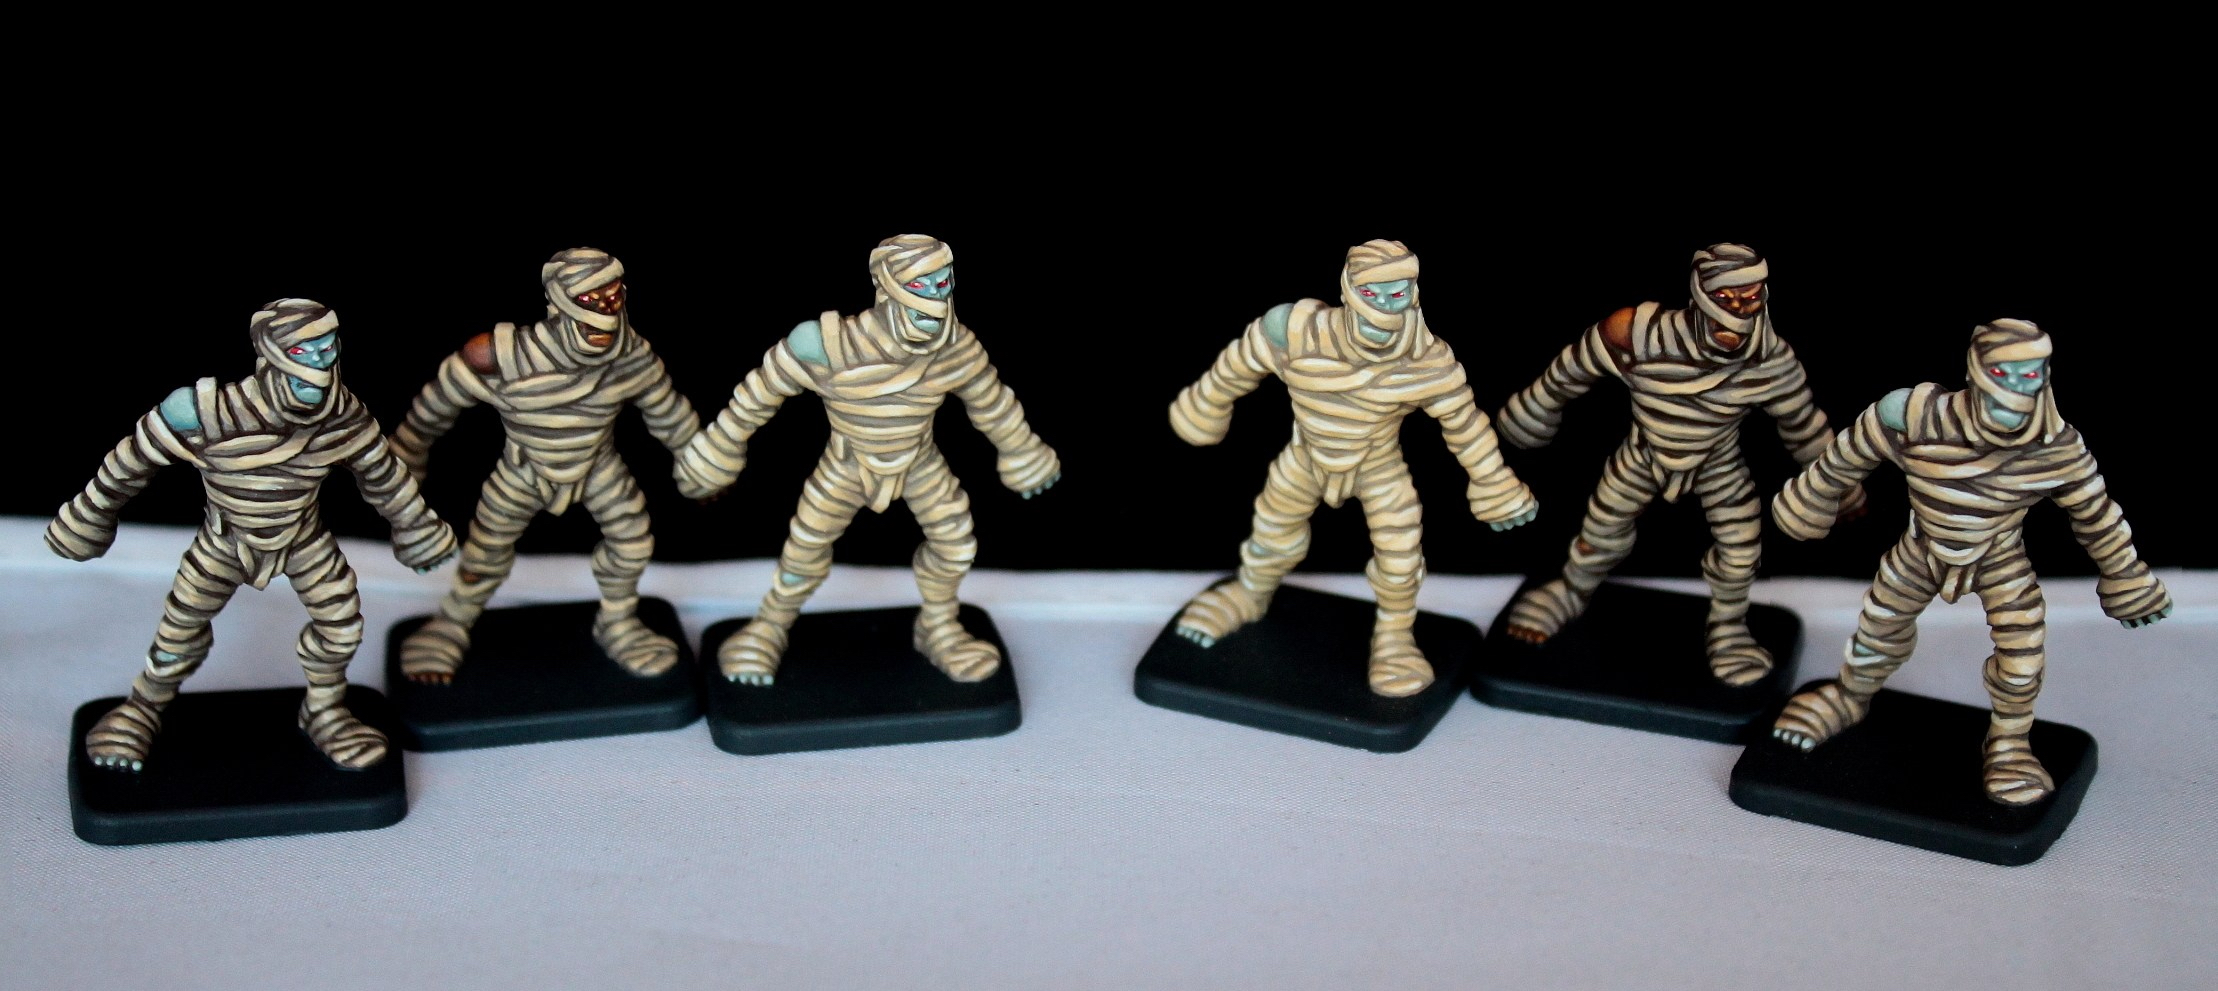 Heroquest Mummy Monstrous Encounters Resin reproduction